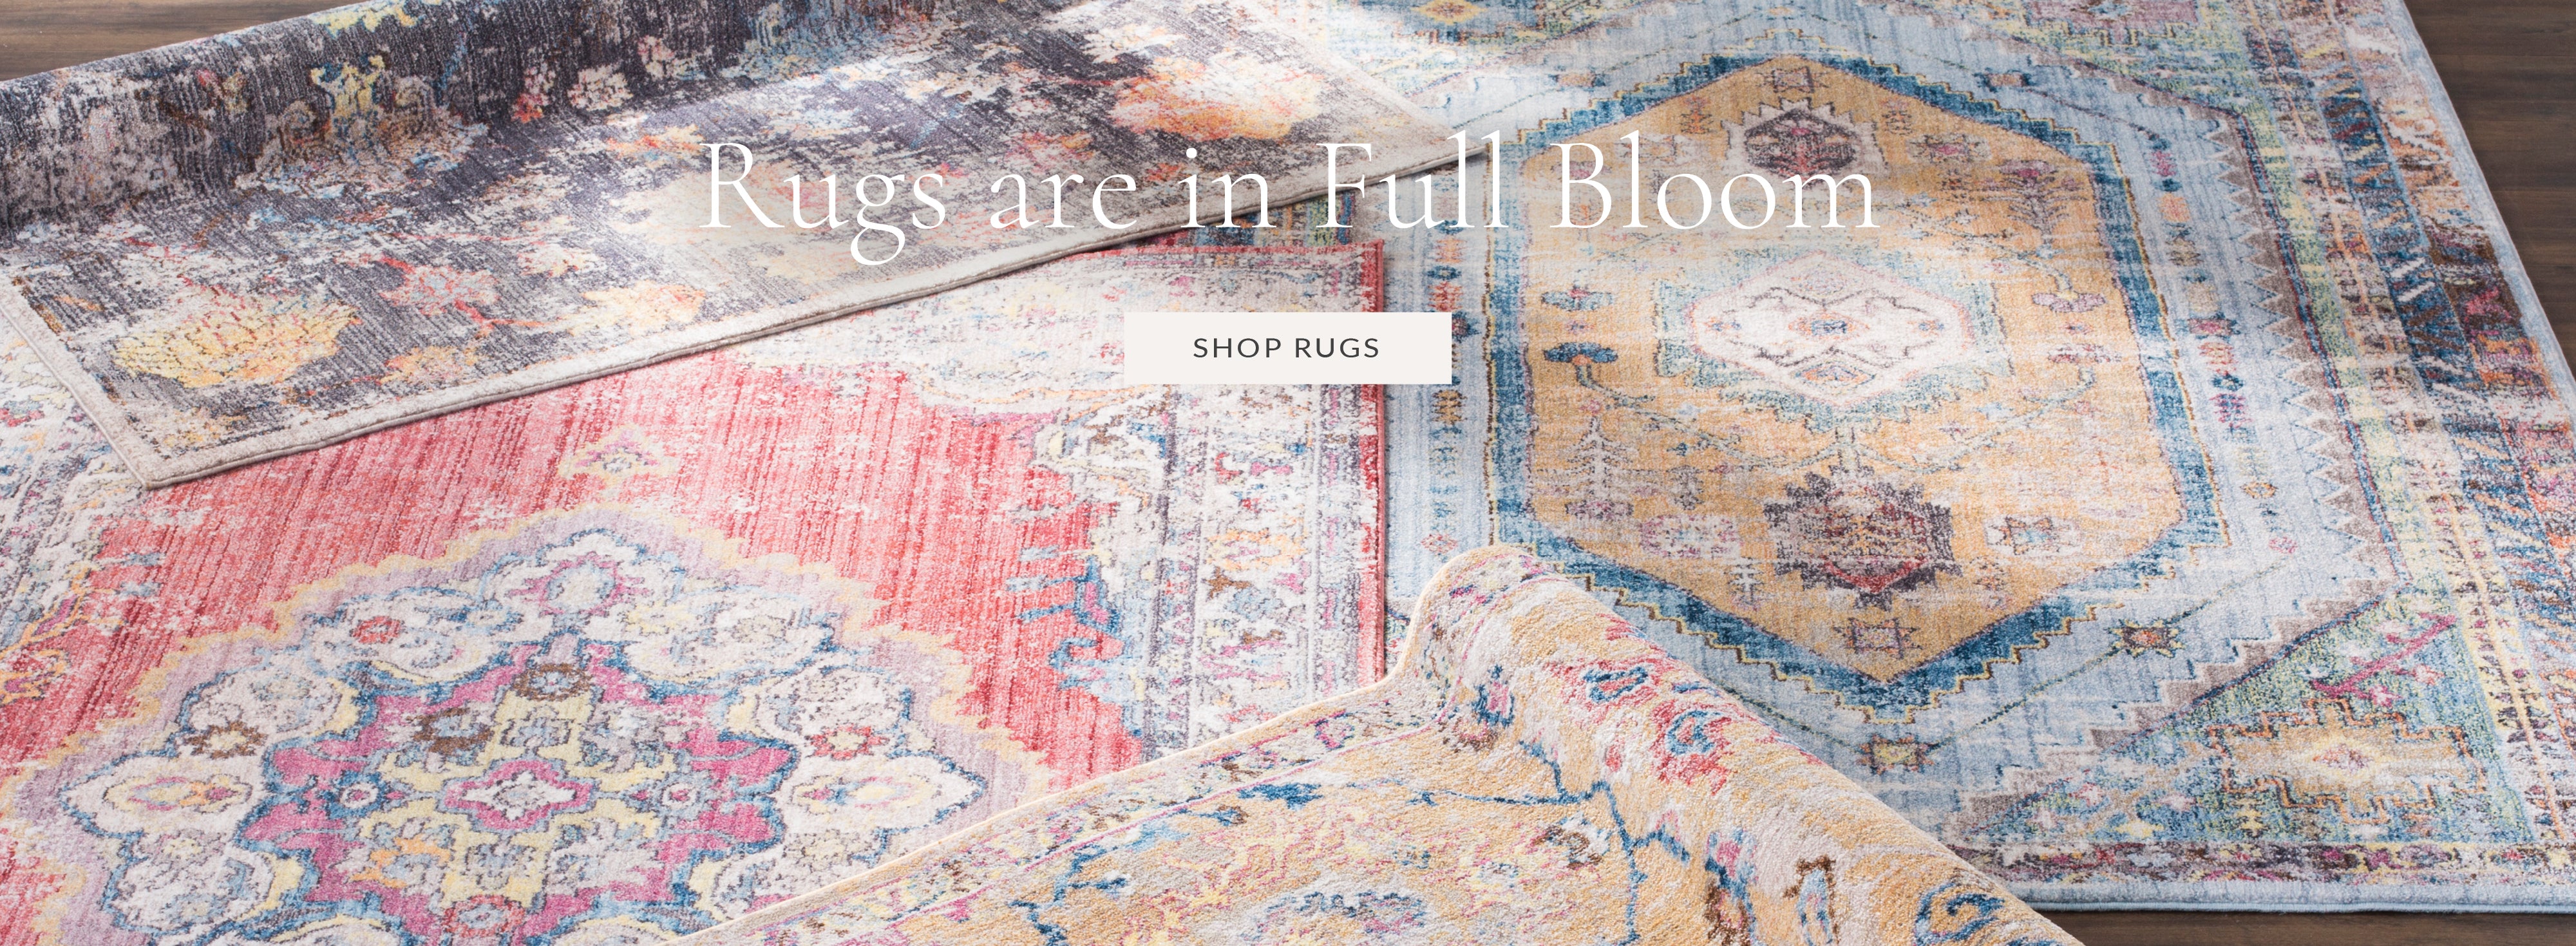 Rugs Are In Full Bloom